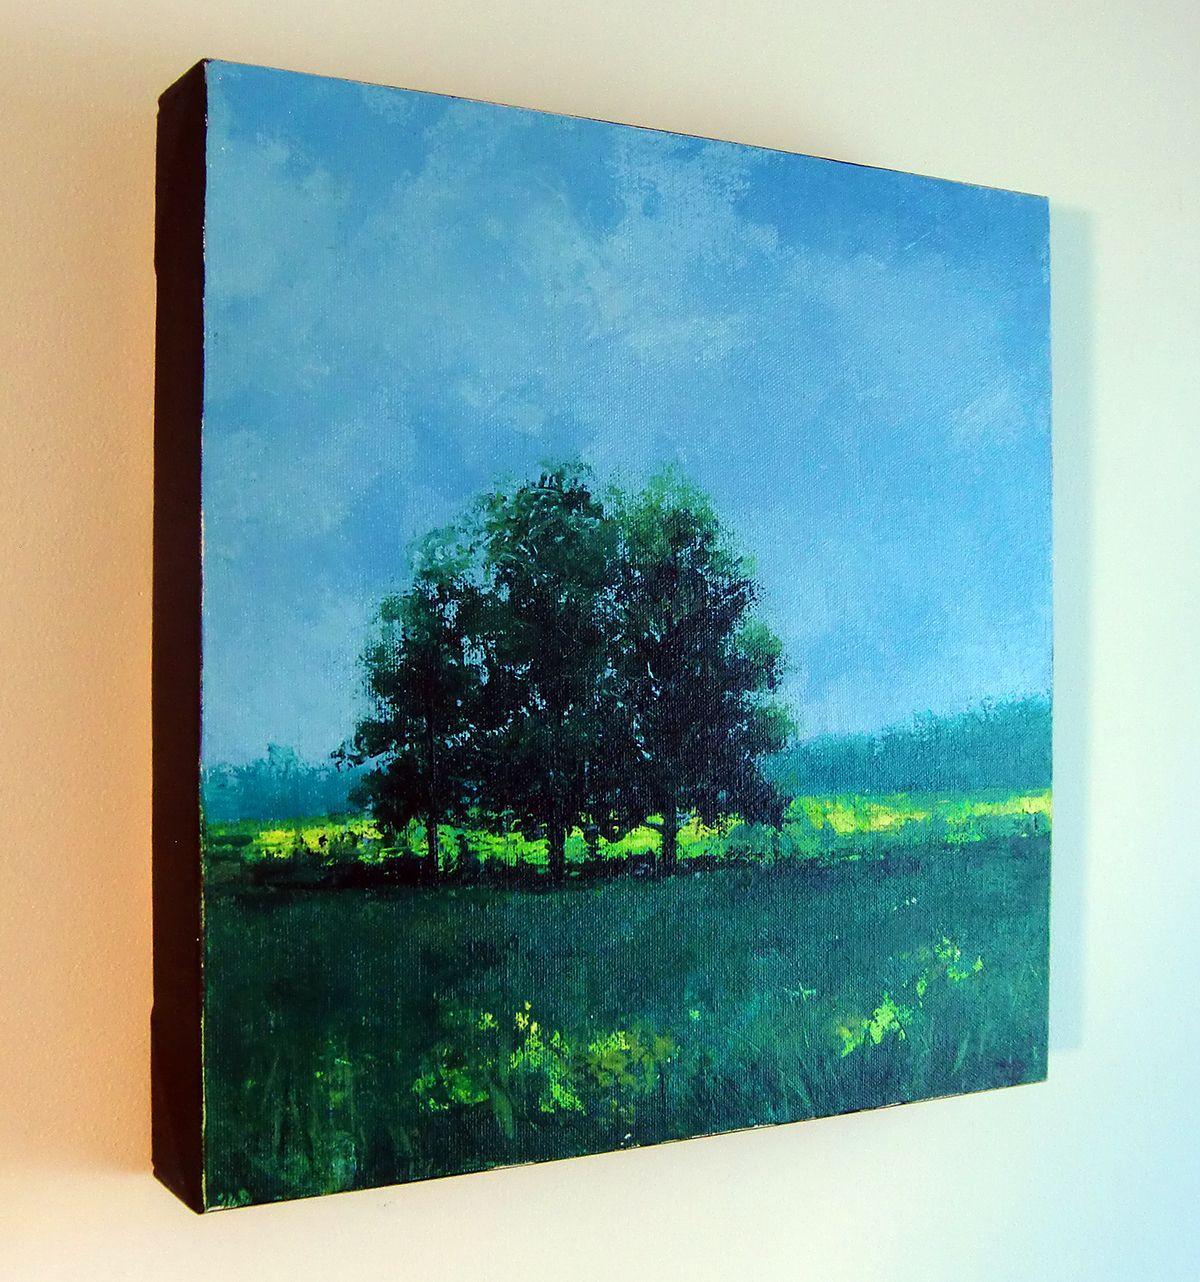 Landscape painting. Cluster of trees in a field.  All works are copyrighted and all rights are reserved by the artist. :: Painting :: Contemporary :: This piece comes with an official certificate of authenticity signed by the artist :: Ready to